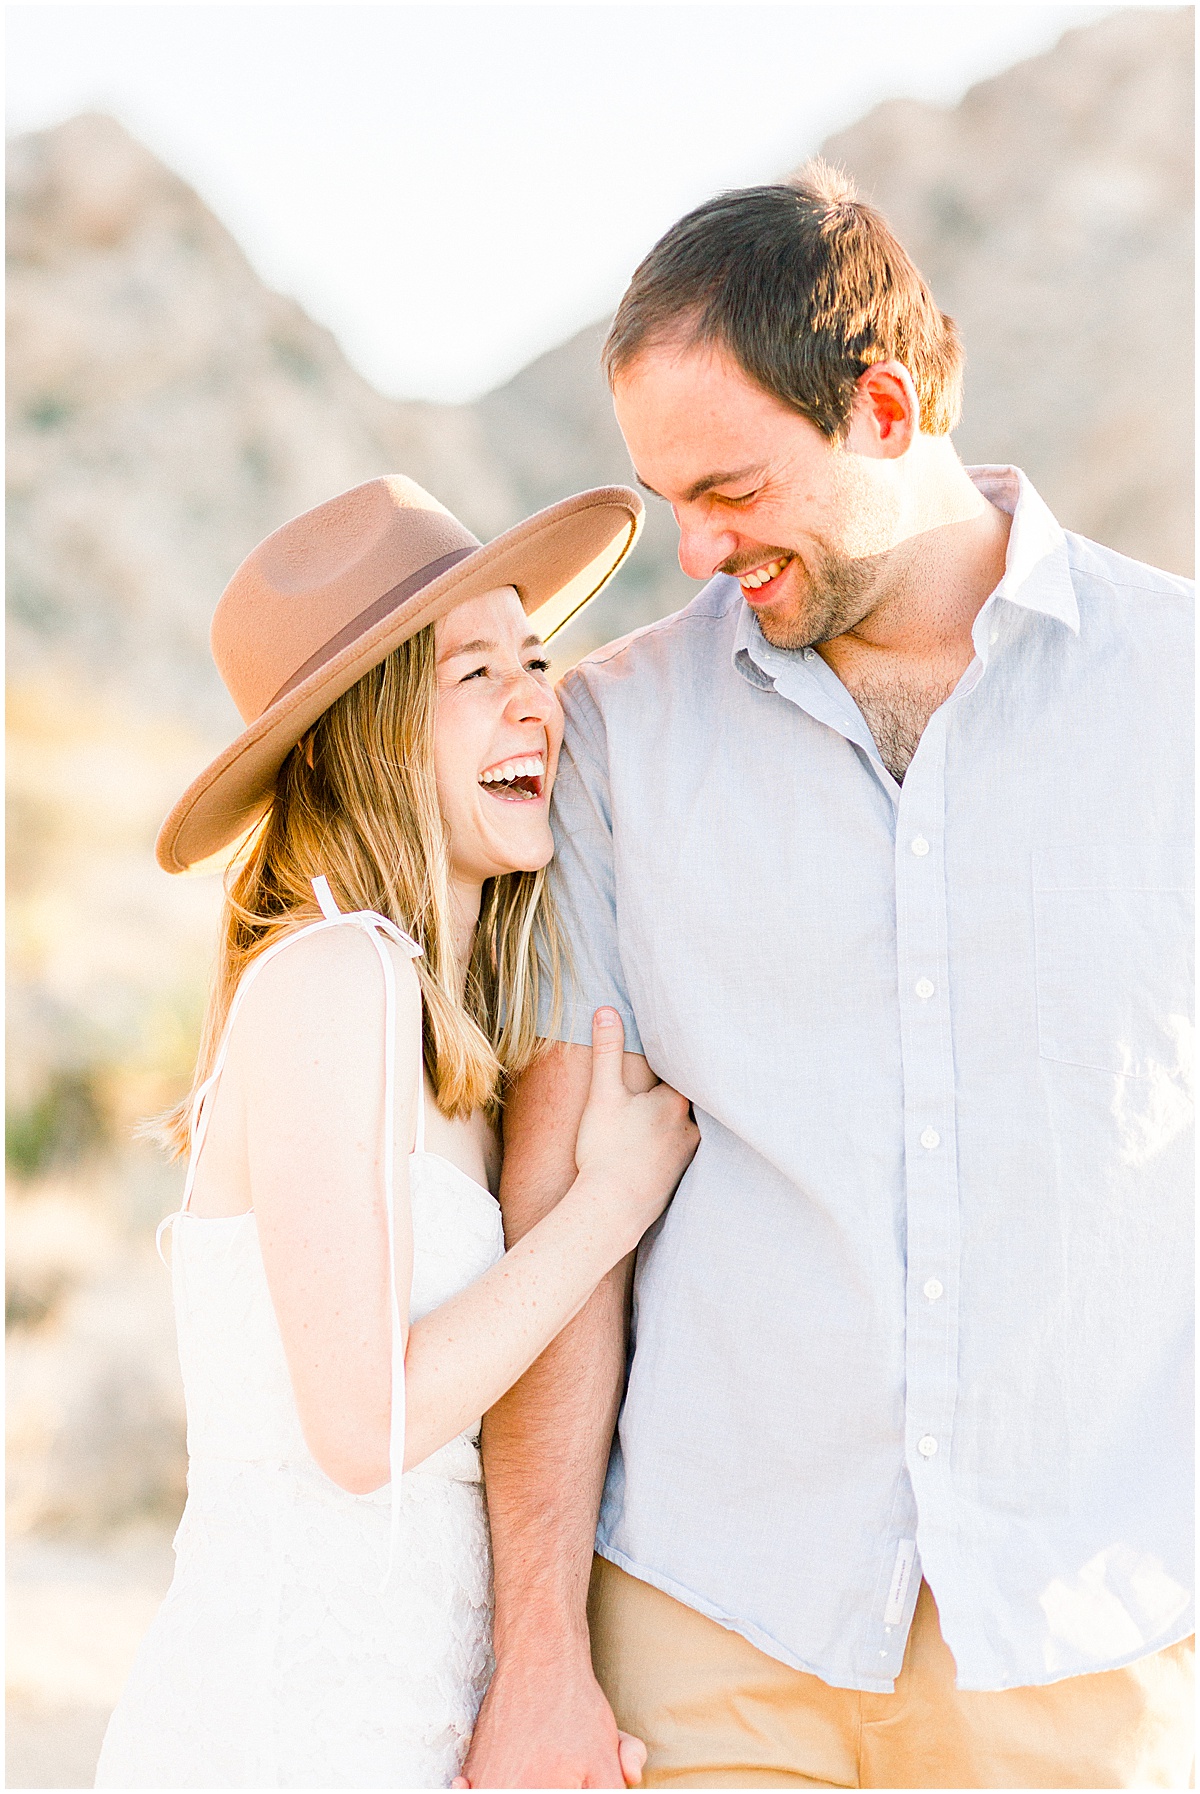 Southern California Palm Springs Wedding & Engagement Photographer Pattengale Photography